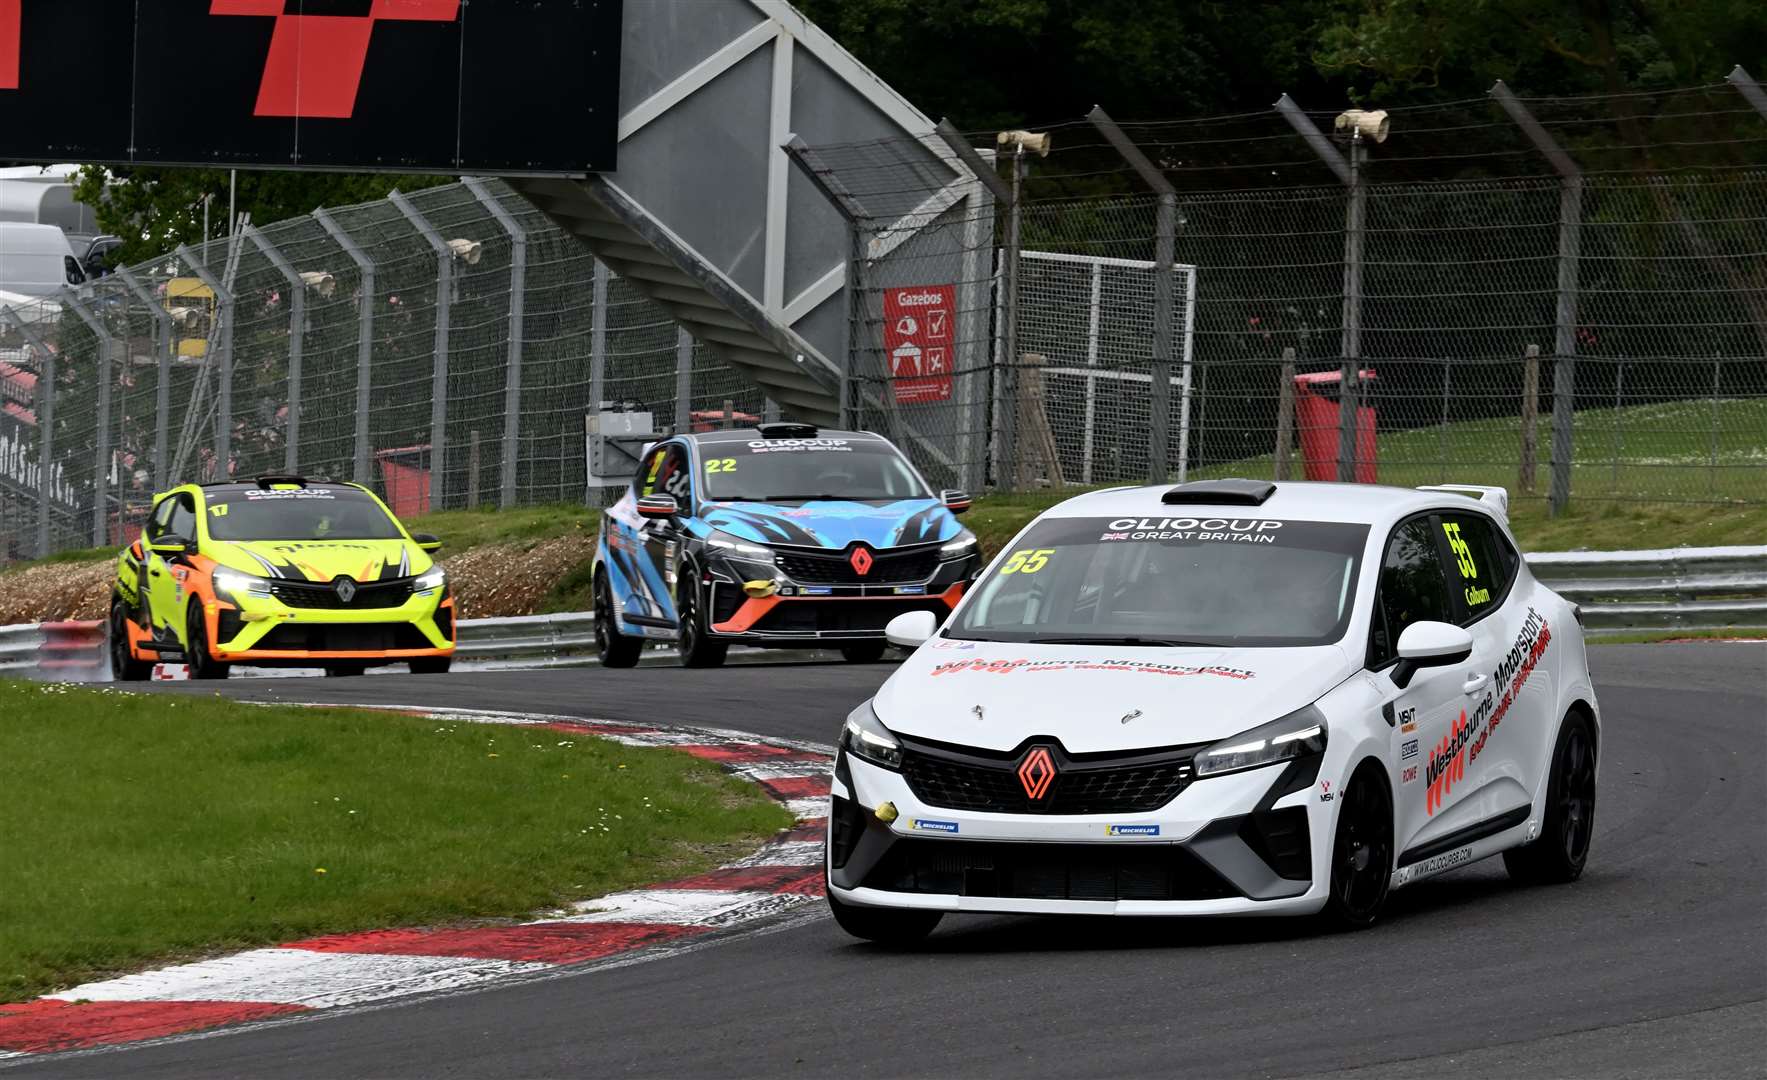 Ben Colburn, who competed in the previous version of the Clio Cup in 2018 and 2019, won the second race on Saturday. Picture: Simon Hildrew